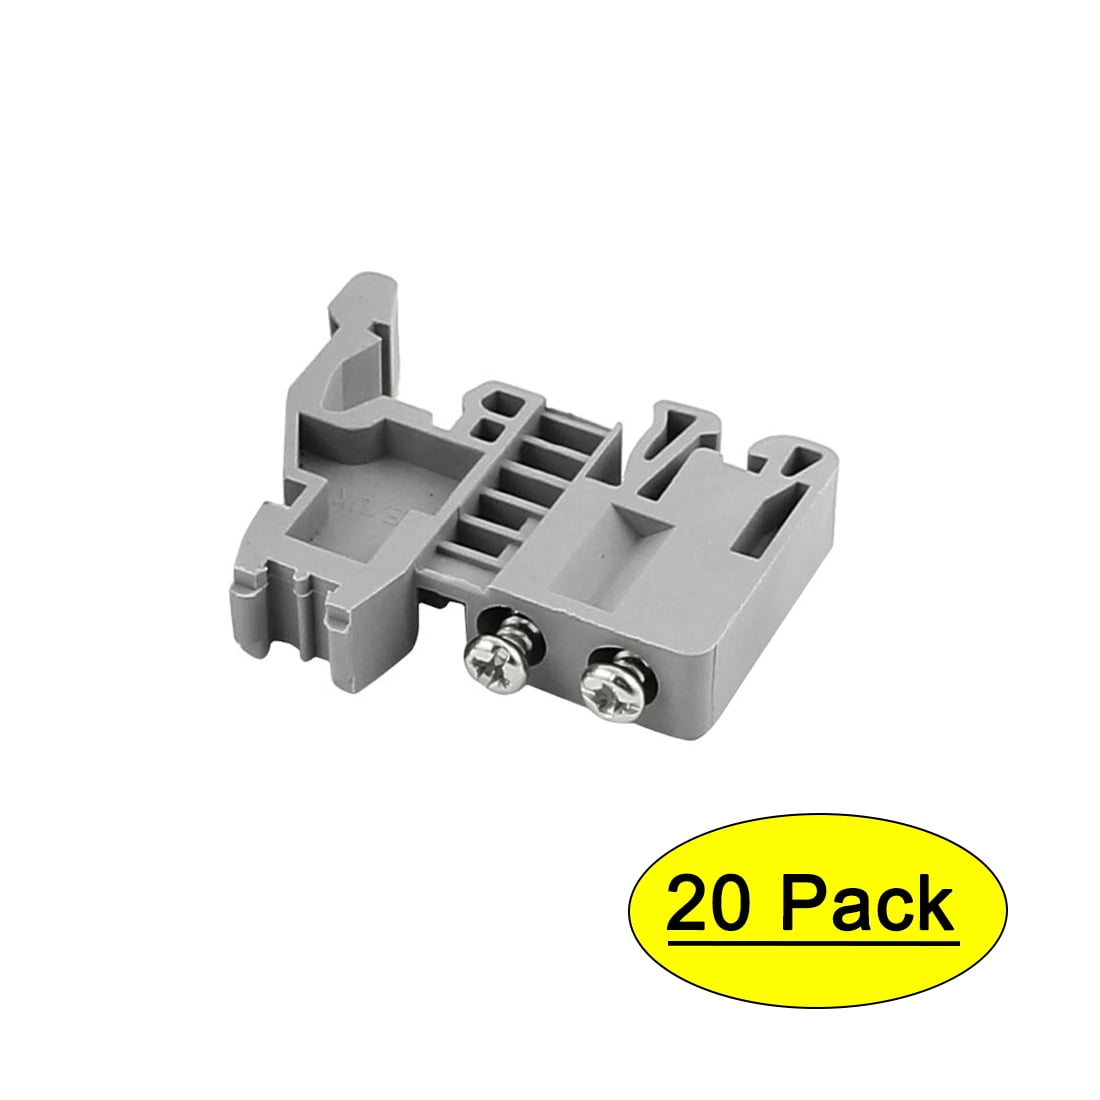 Lot of 20 New DIN Rail Mounting Terminal Clips for 35mm DIN Rail Wiring Duct 